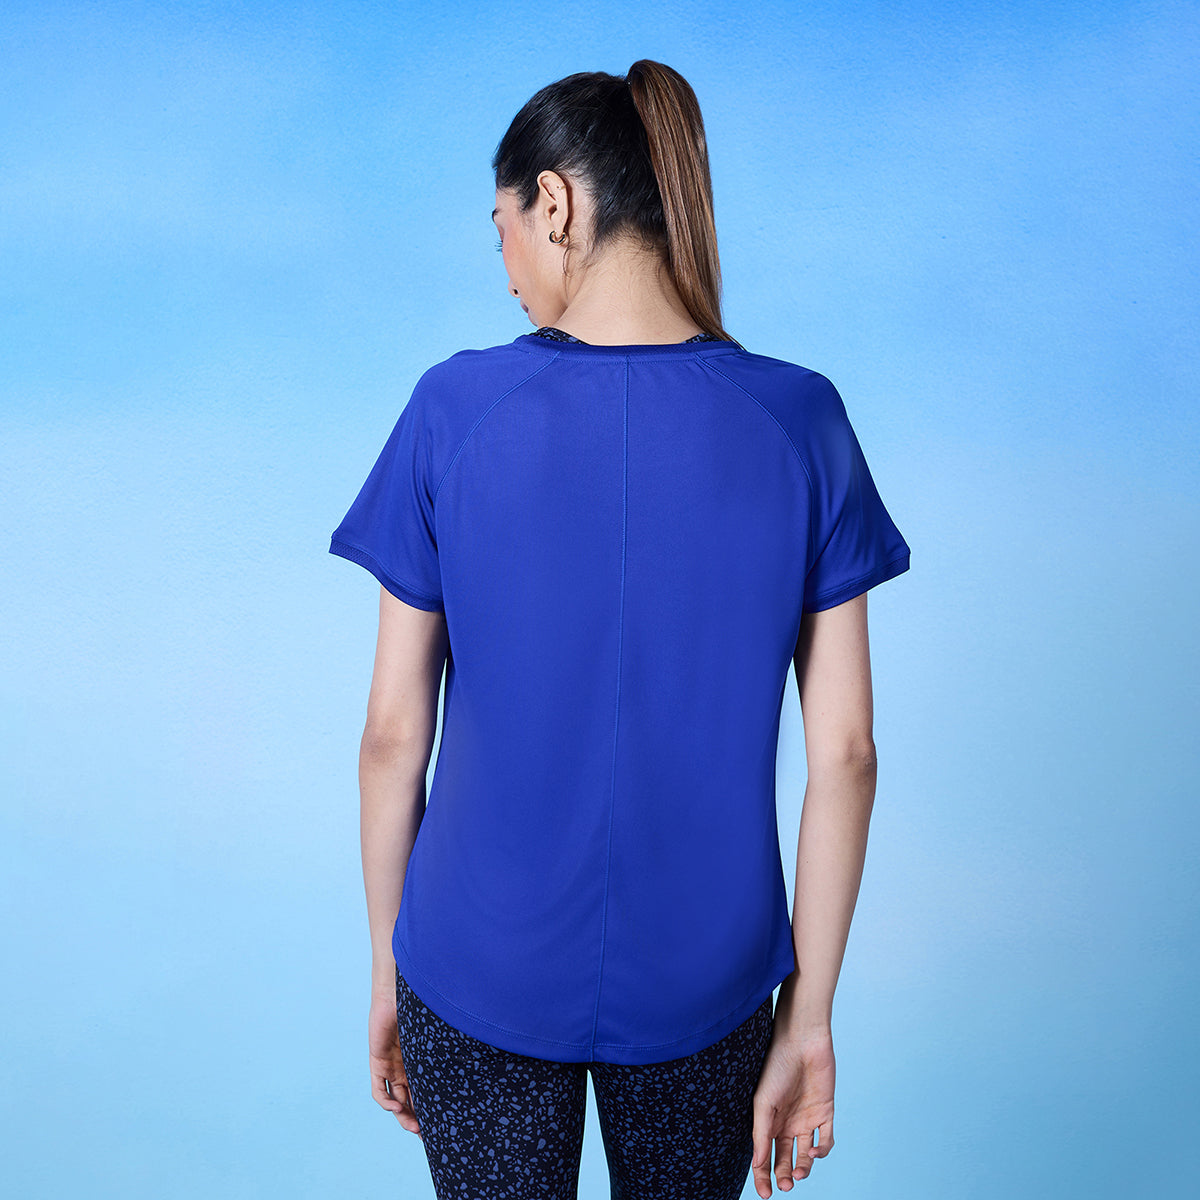 Nykd All Day Active Tee - NYK127 - Blue